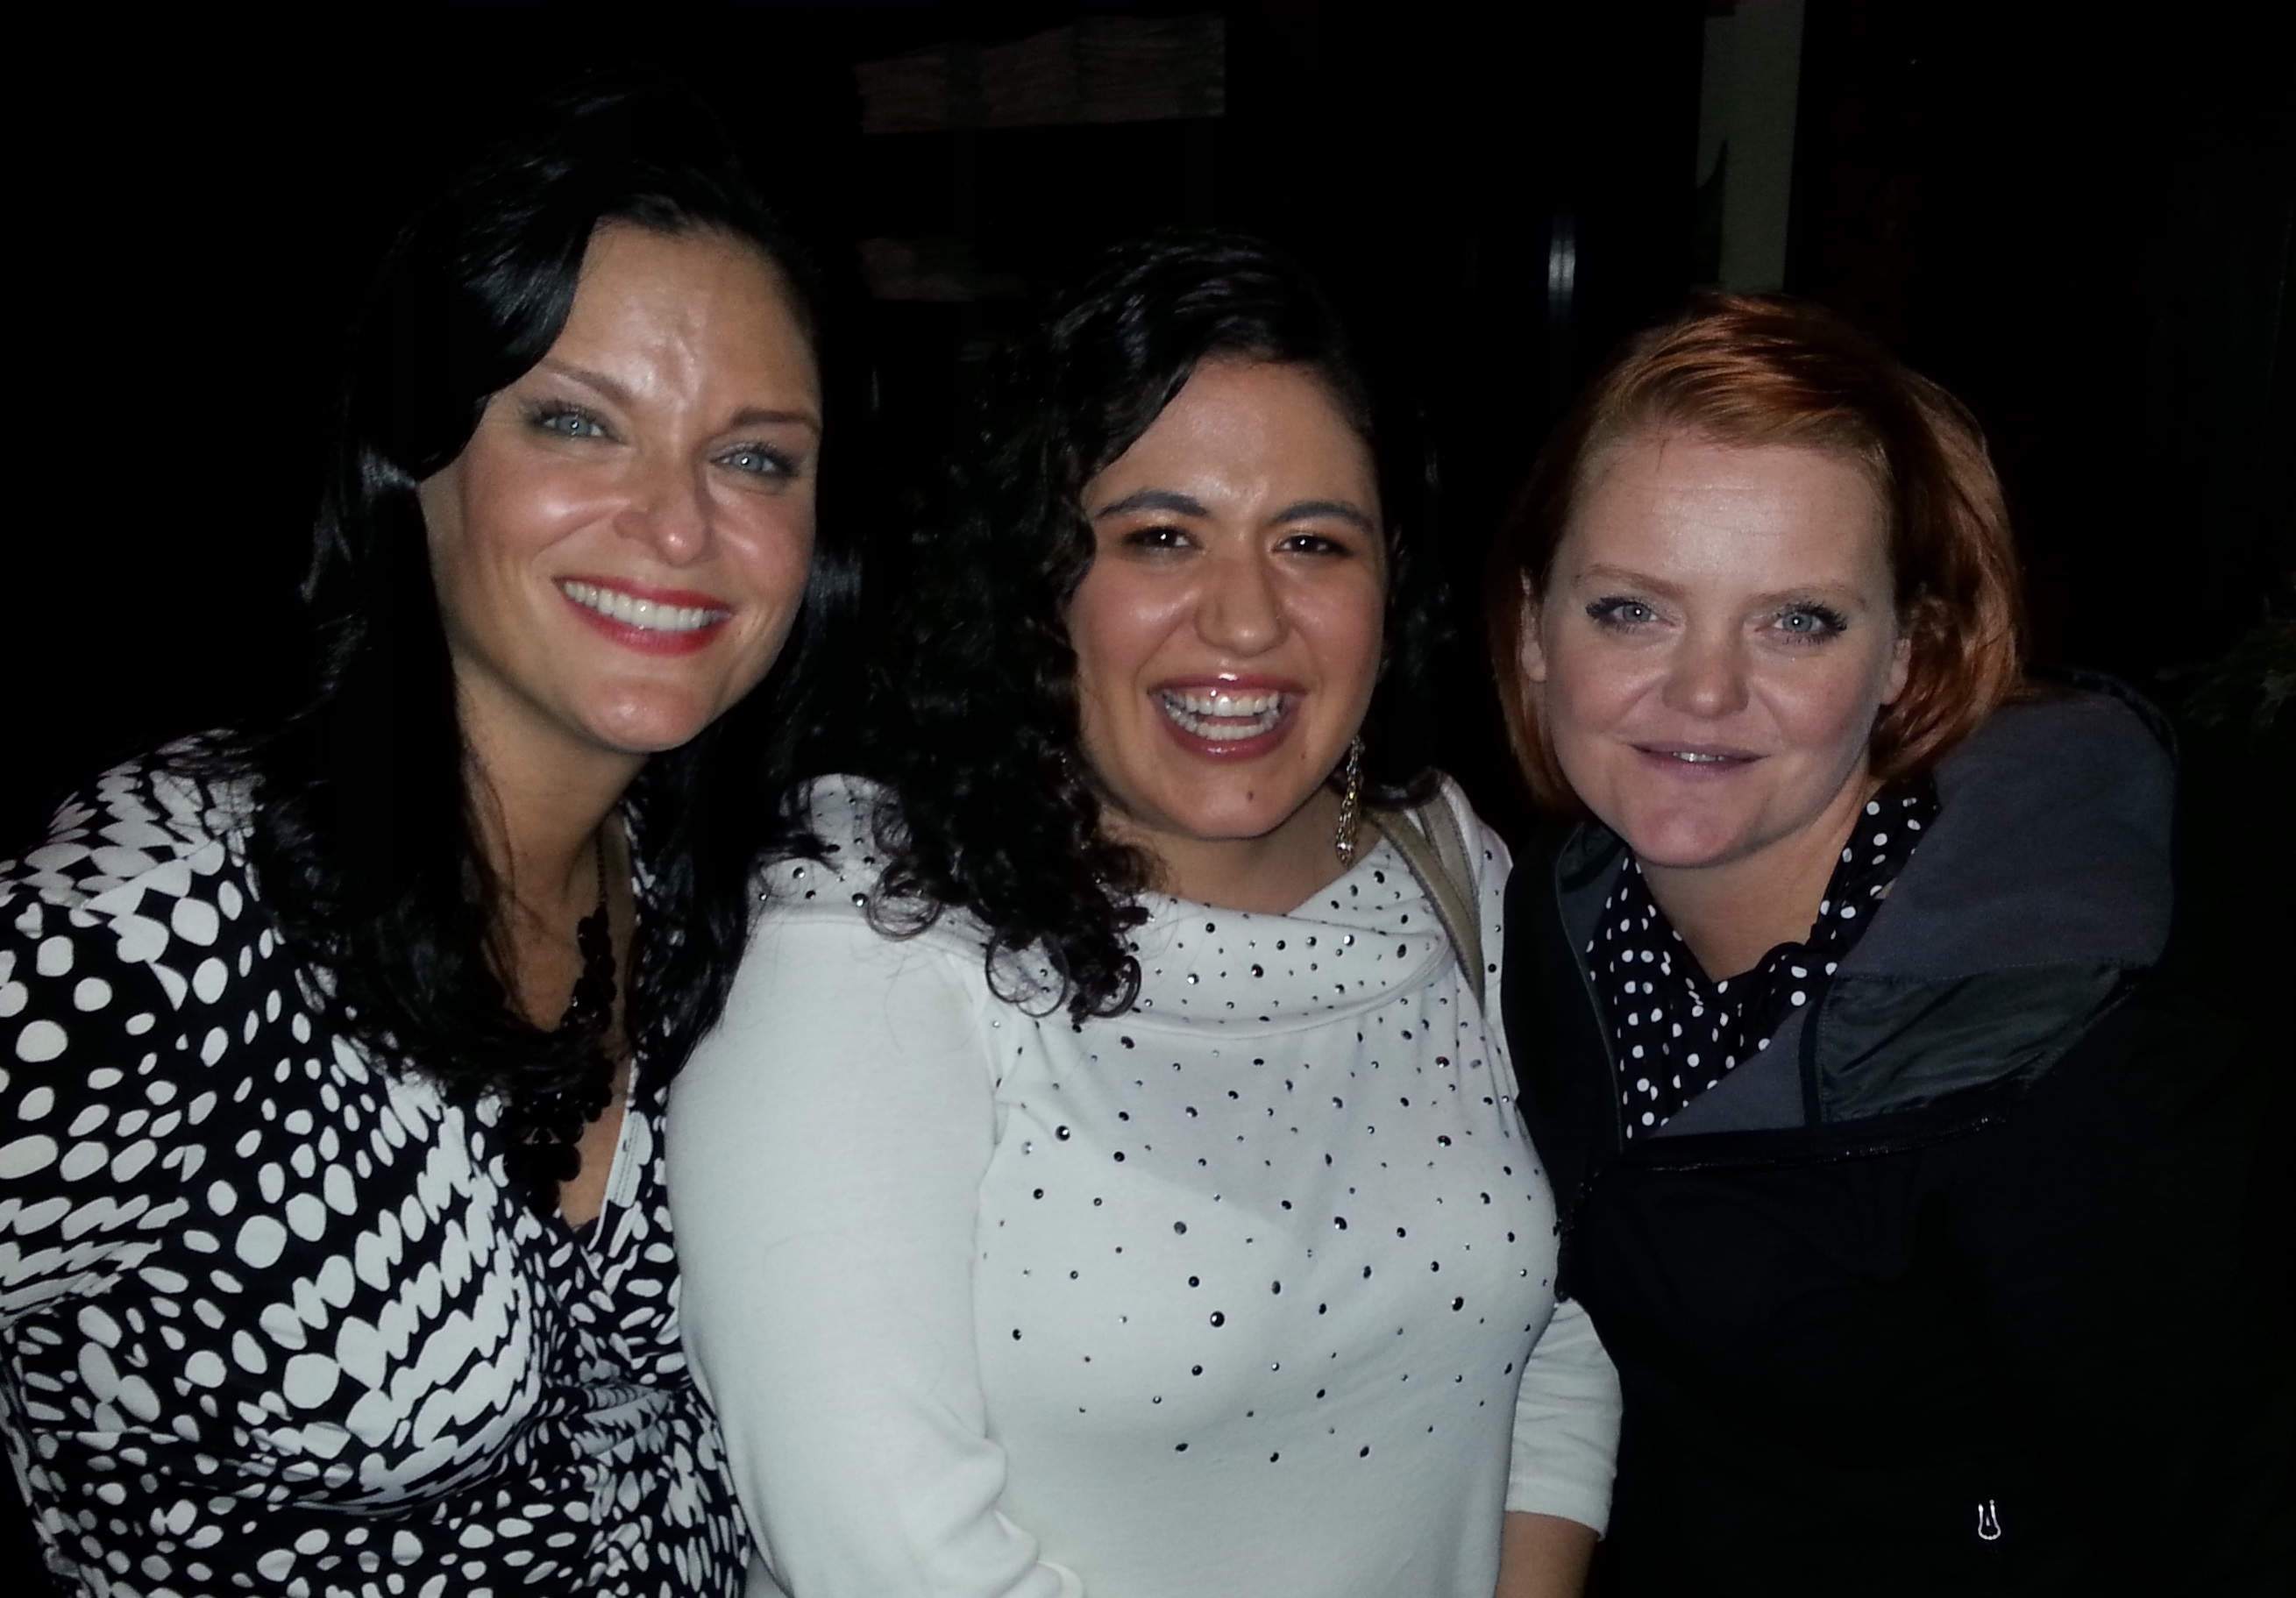 Becki Dennis at an Imagine Magazine Party with Erica McDermott and Melissa McMeekin.